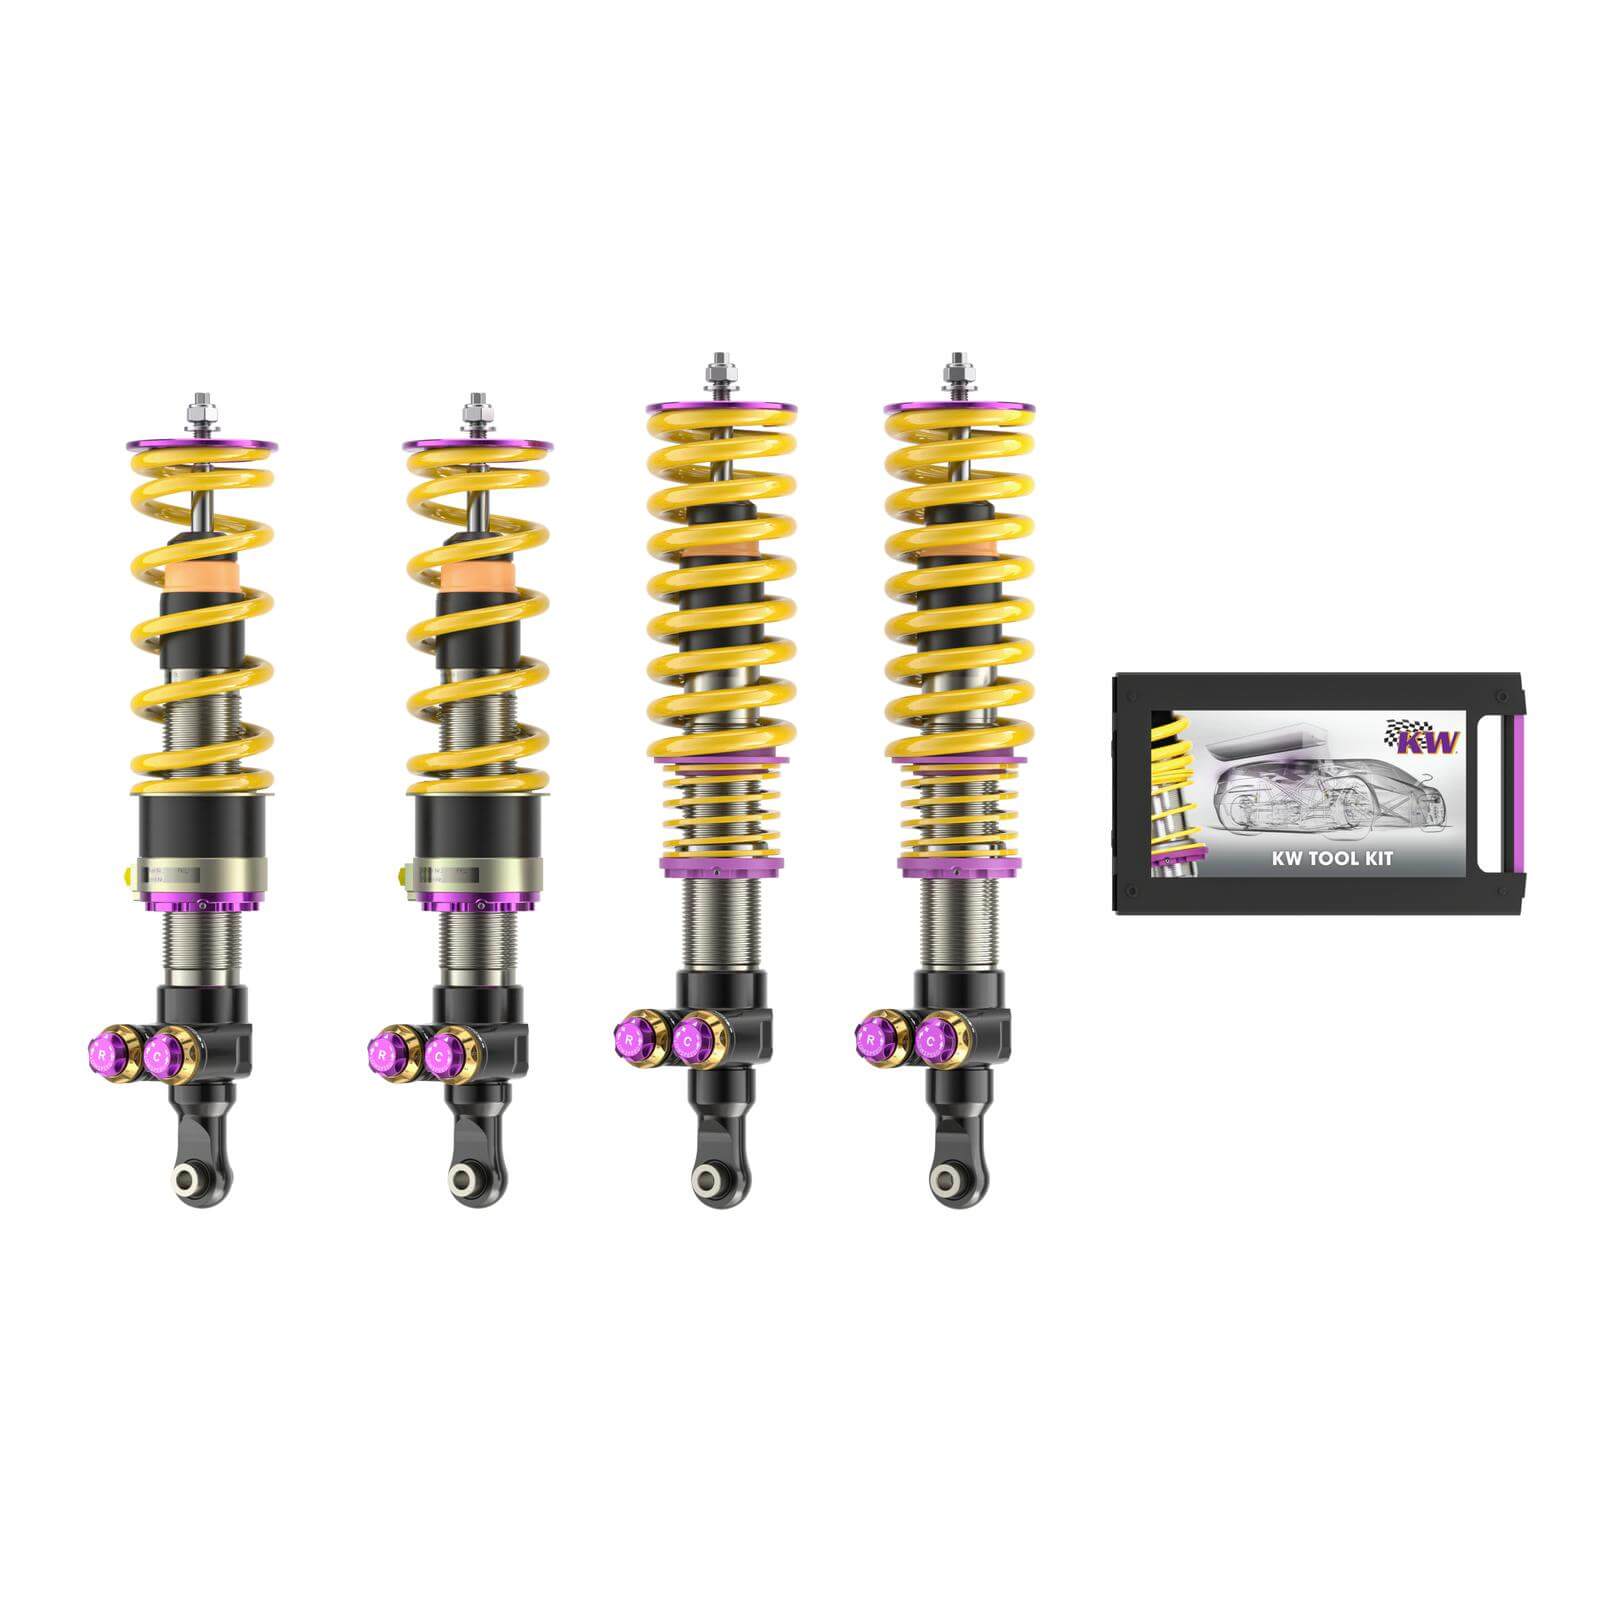 KW 30942220 Coilover hydraulic system kit HLS 2 for FERRARI F8 Spider 3.9 / F8 Tributo Coupe 3.9 2019+ Photo-0 